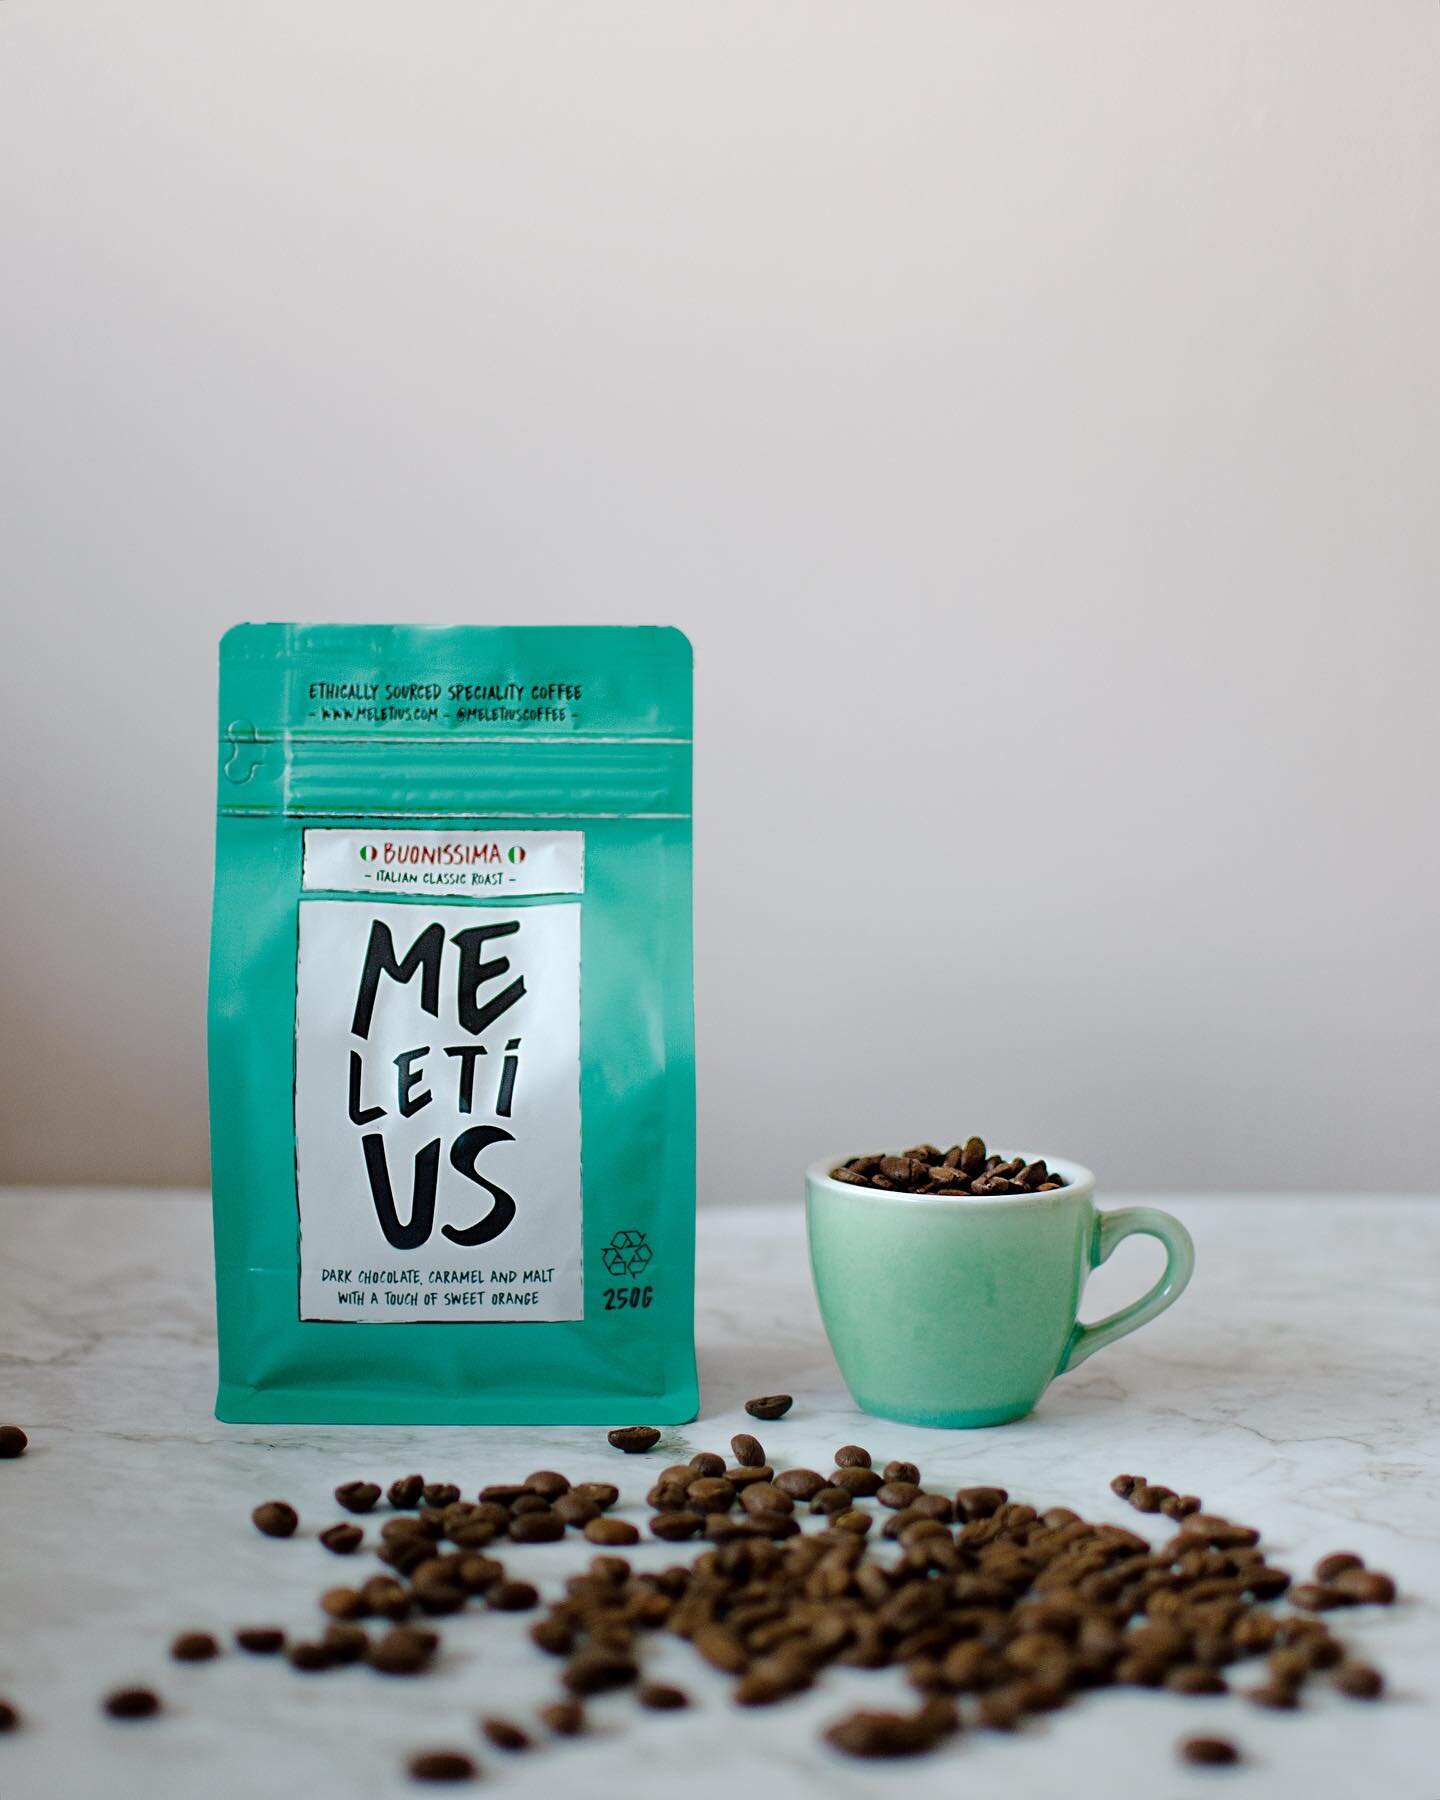 Our Italian classic dark roast. Dark chocolate and caramel notes with malty and citrus flavours - Buonissima! 🇮🇹

Get your hands on some today 👇🏼
https://www.meletius.com/shop-2/p/buonissima

.
.
.
.

#coffee #specialitycoffee #coffeeroasting #co